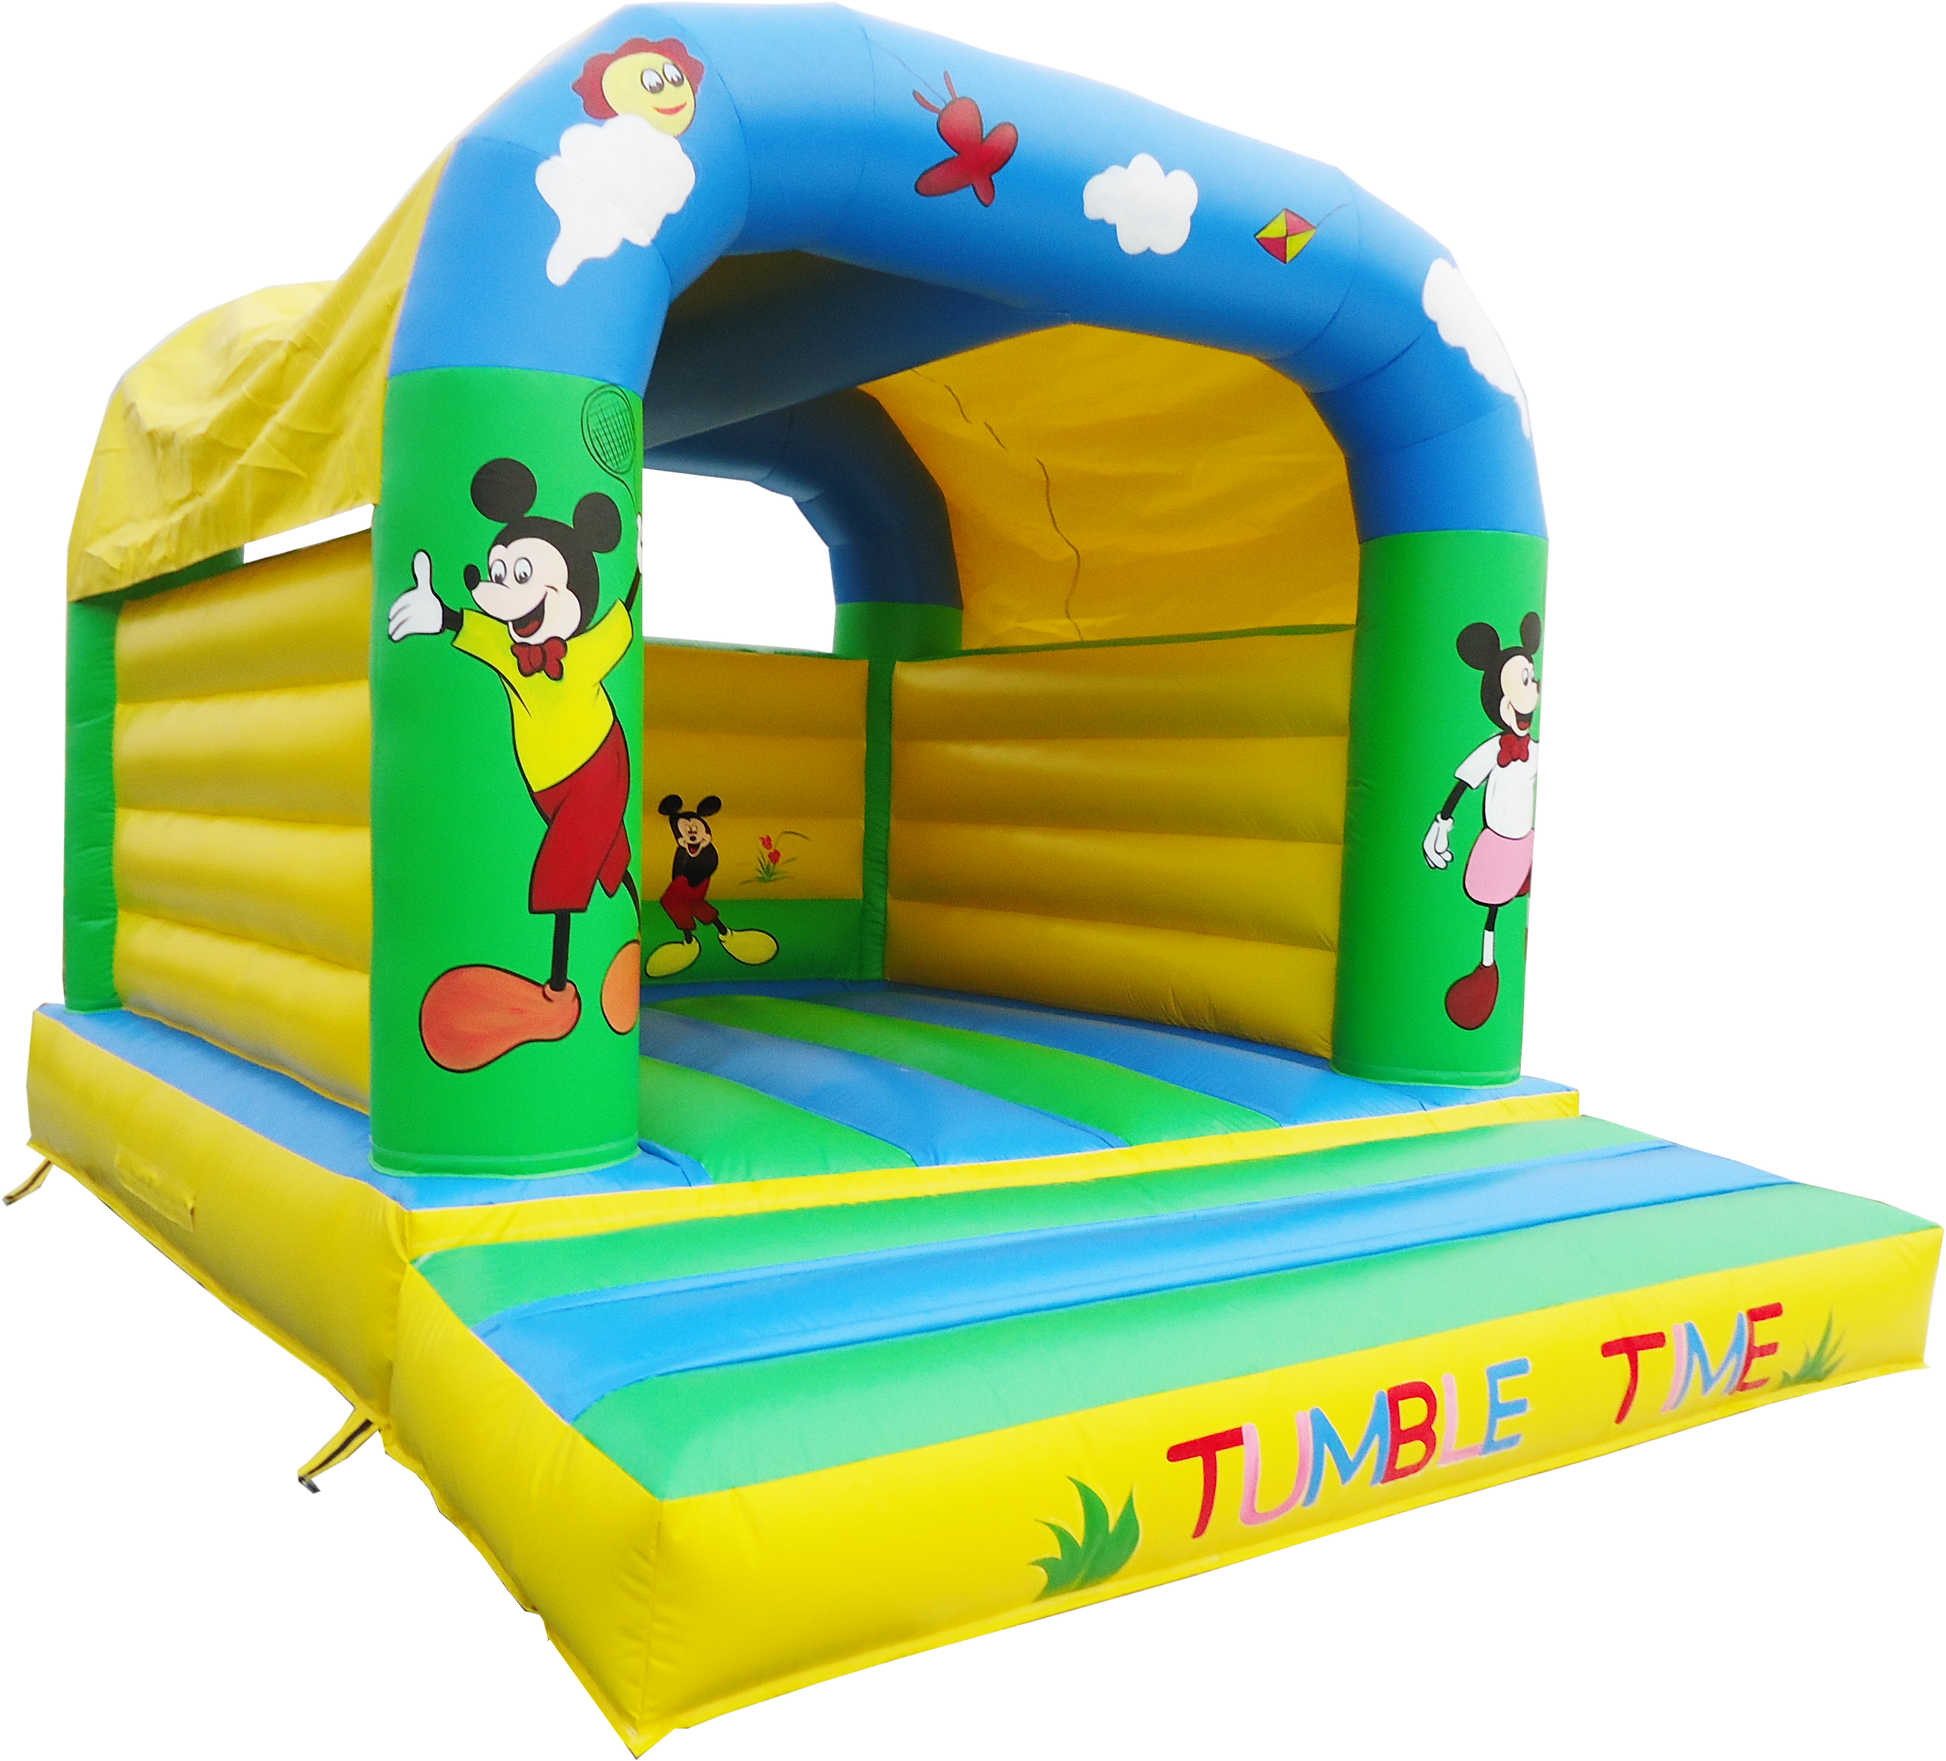 YARD Commercial Inflatable Bouncer Jumper